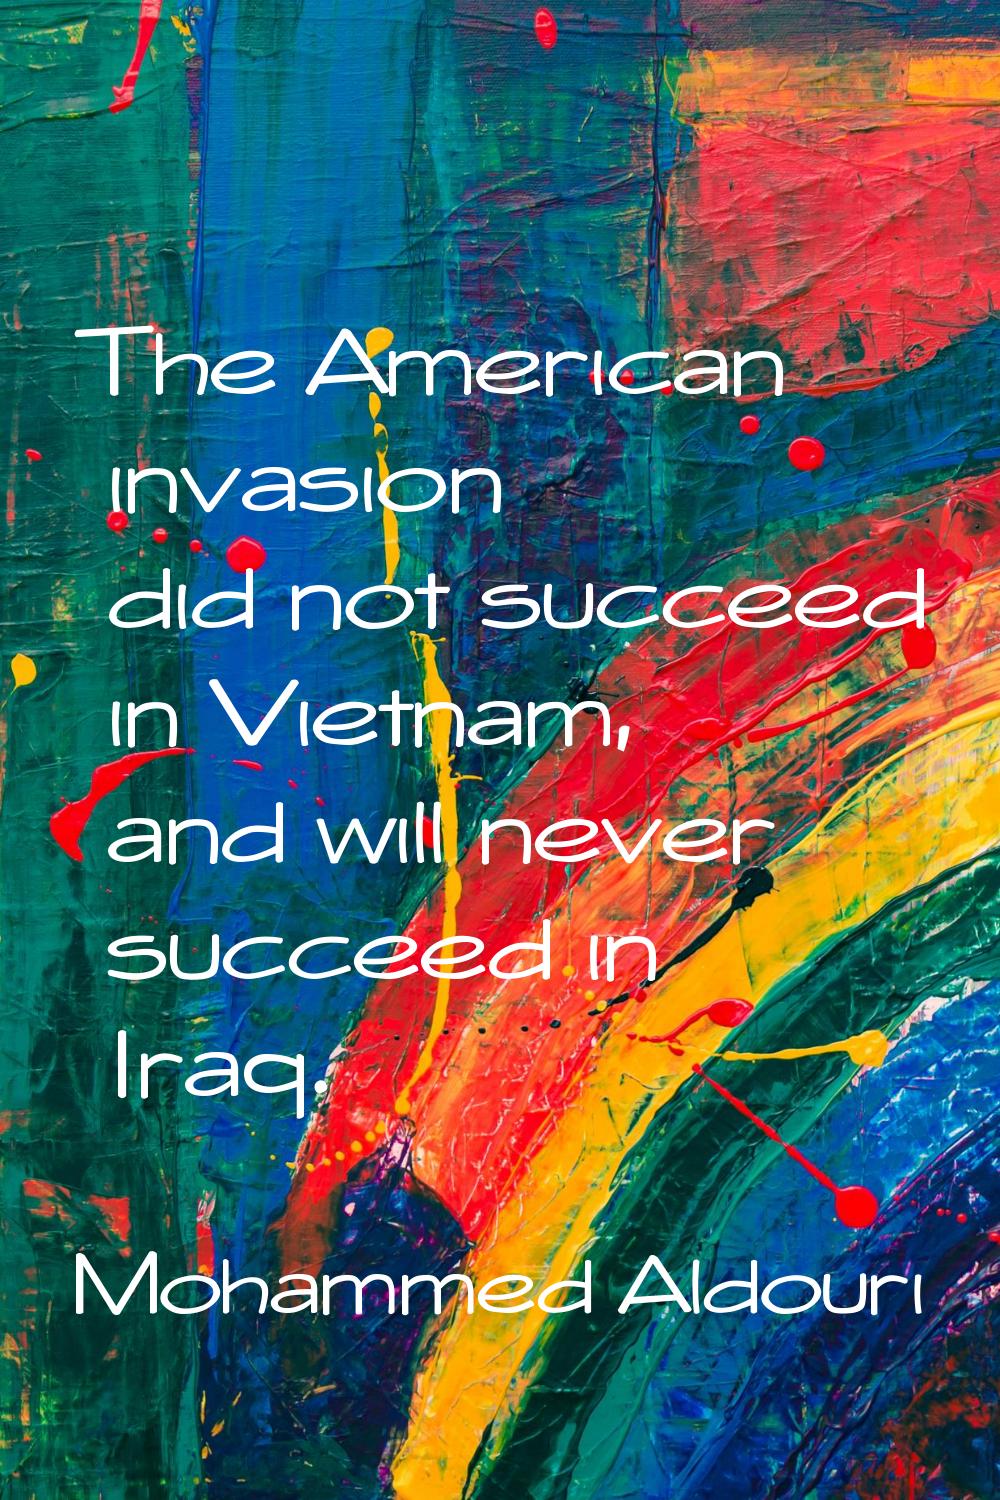 The American invasion did not succeed in Vietnam, and will never succeed in Iraq.